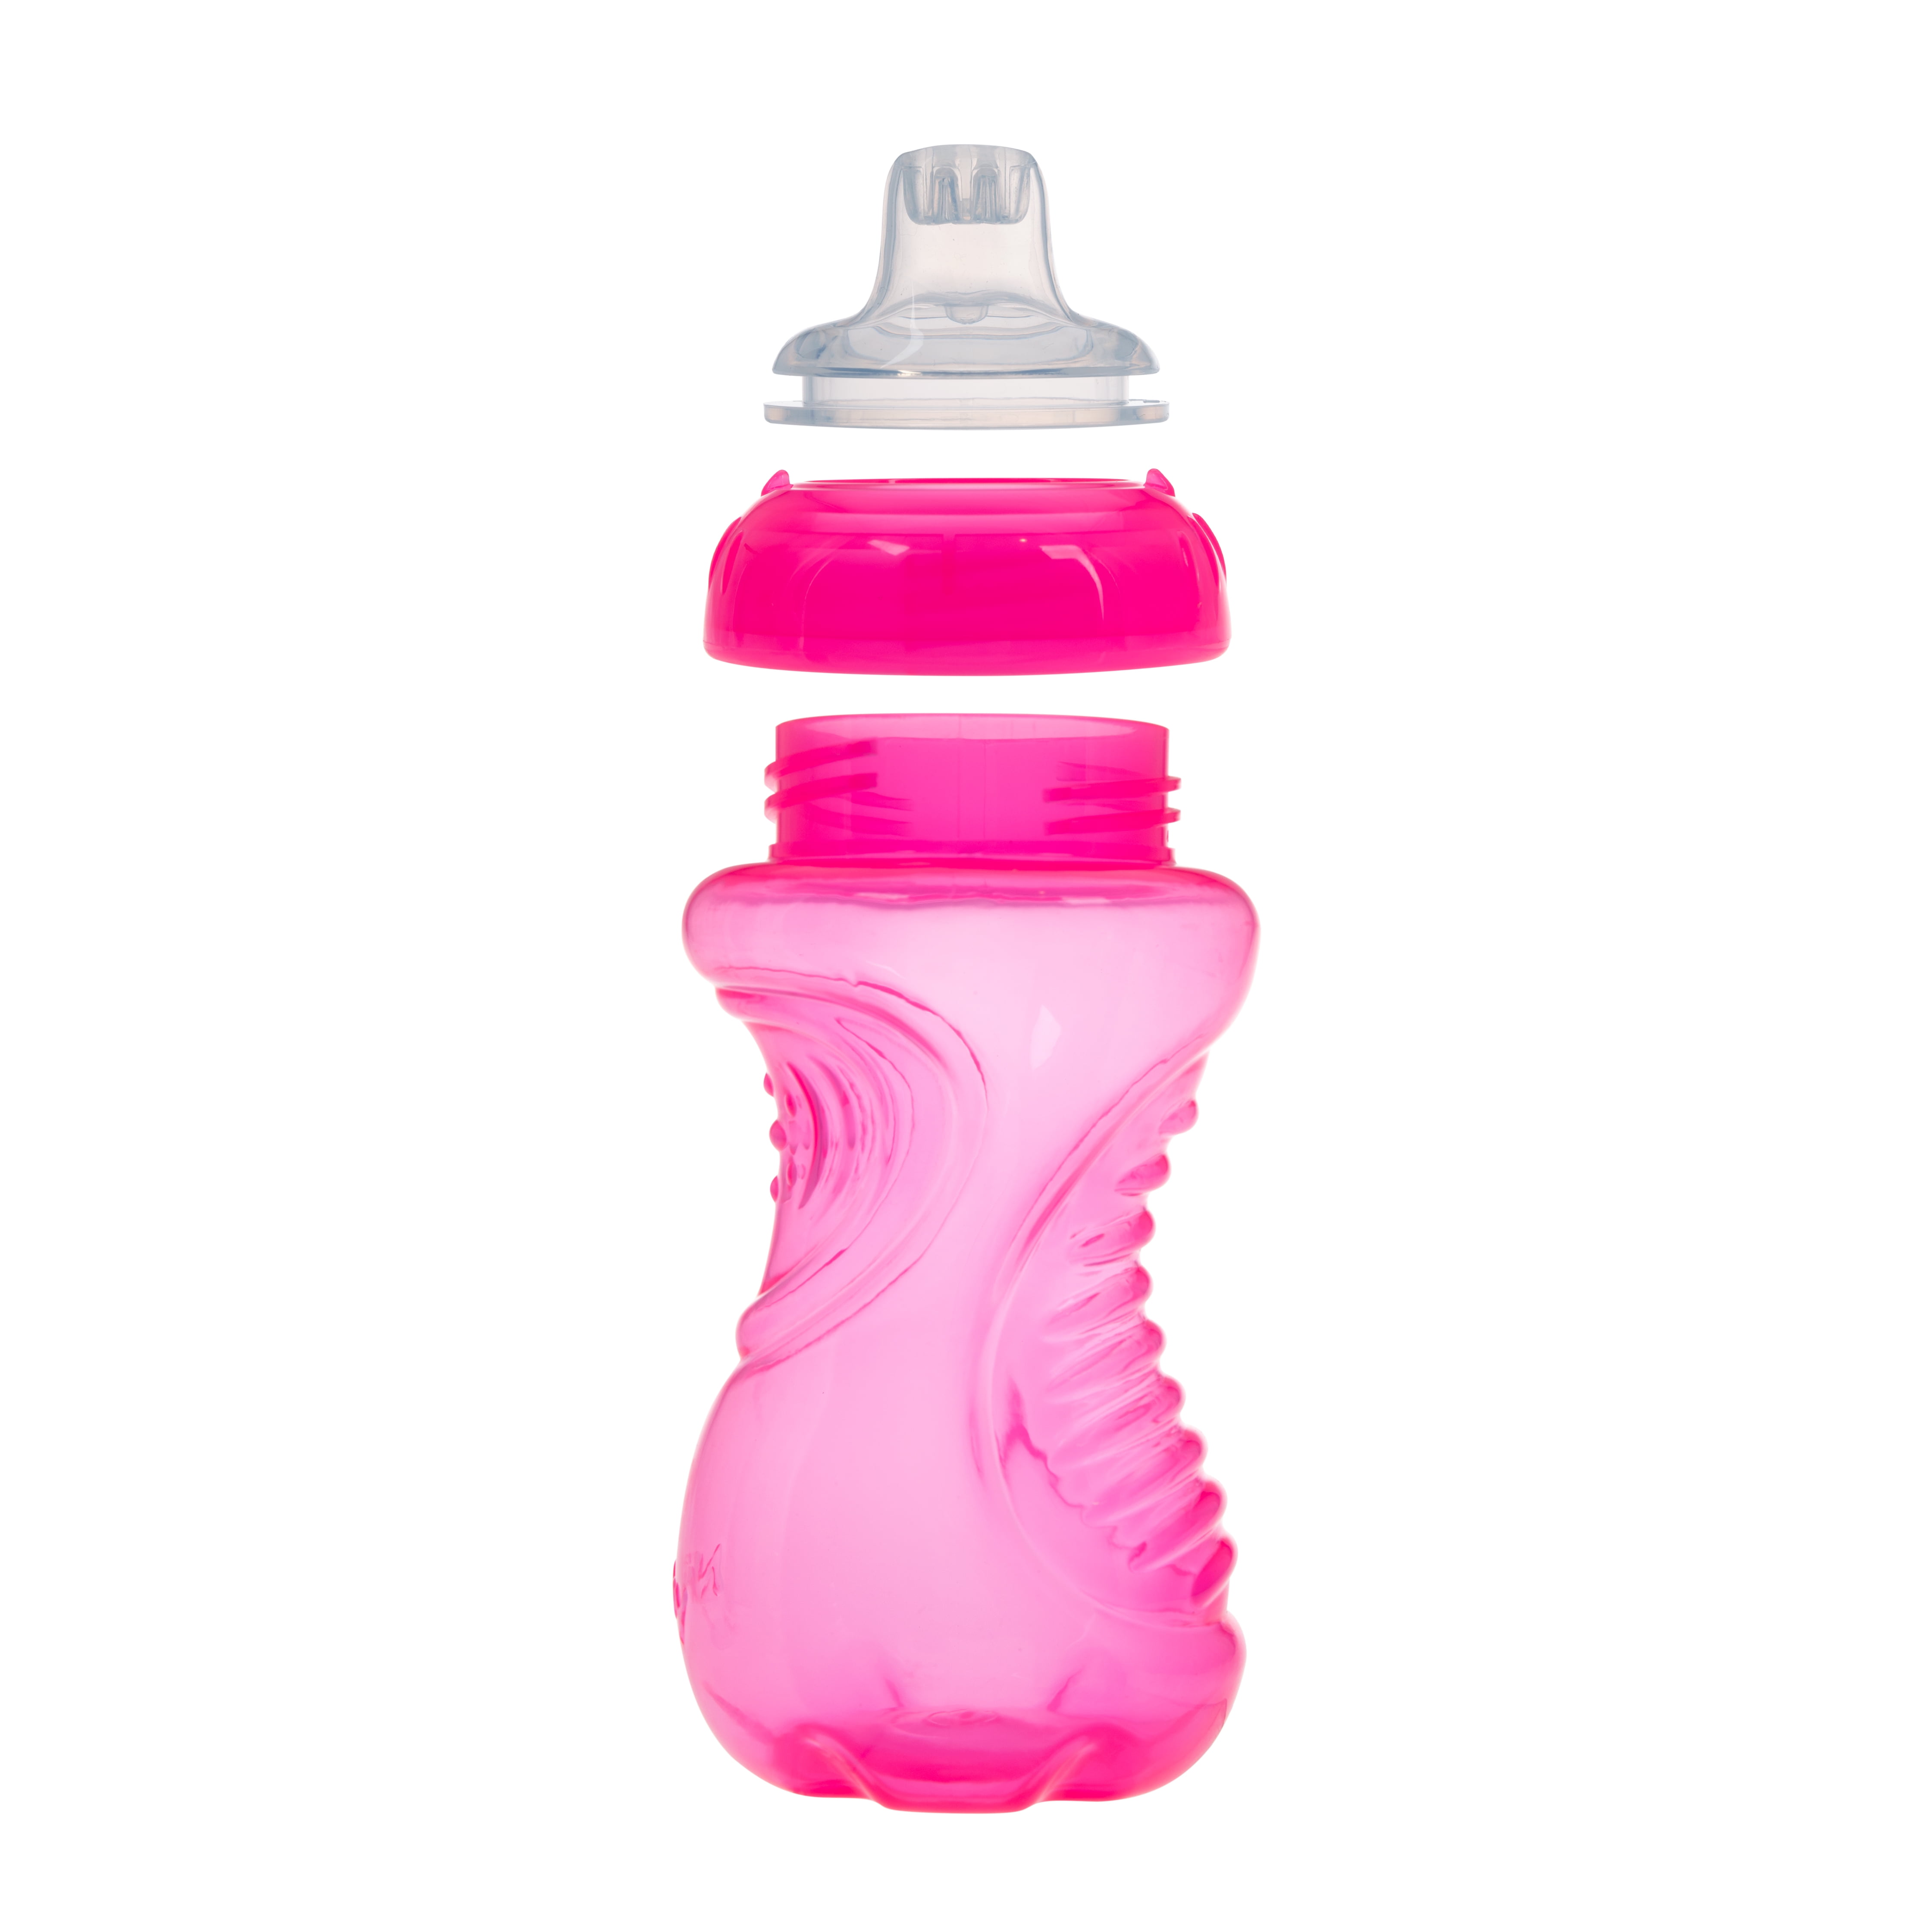 Weighted Ball Sippy Cups for Toddlers 300ml Leakproof PP Water Bottle with Handle and Straw (No FDA Certification, BPA Free) - Light Pink / Bear